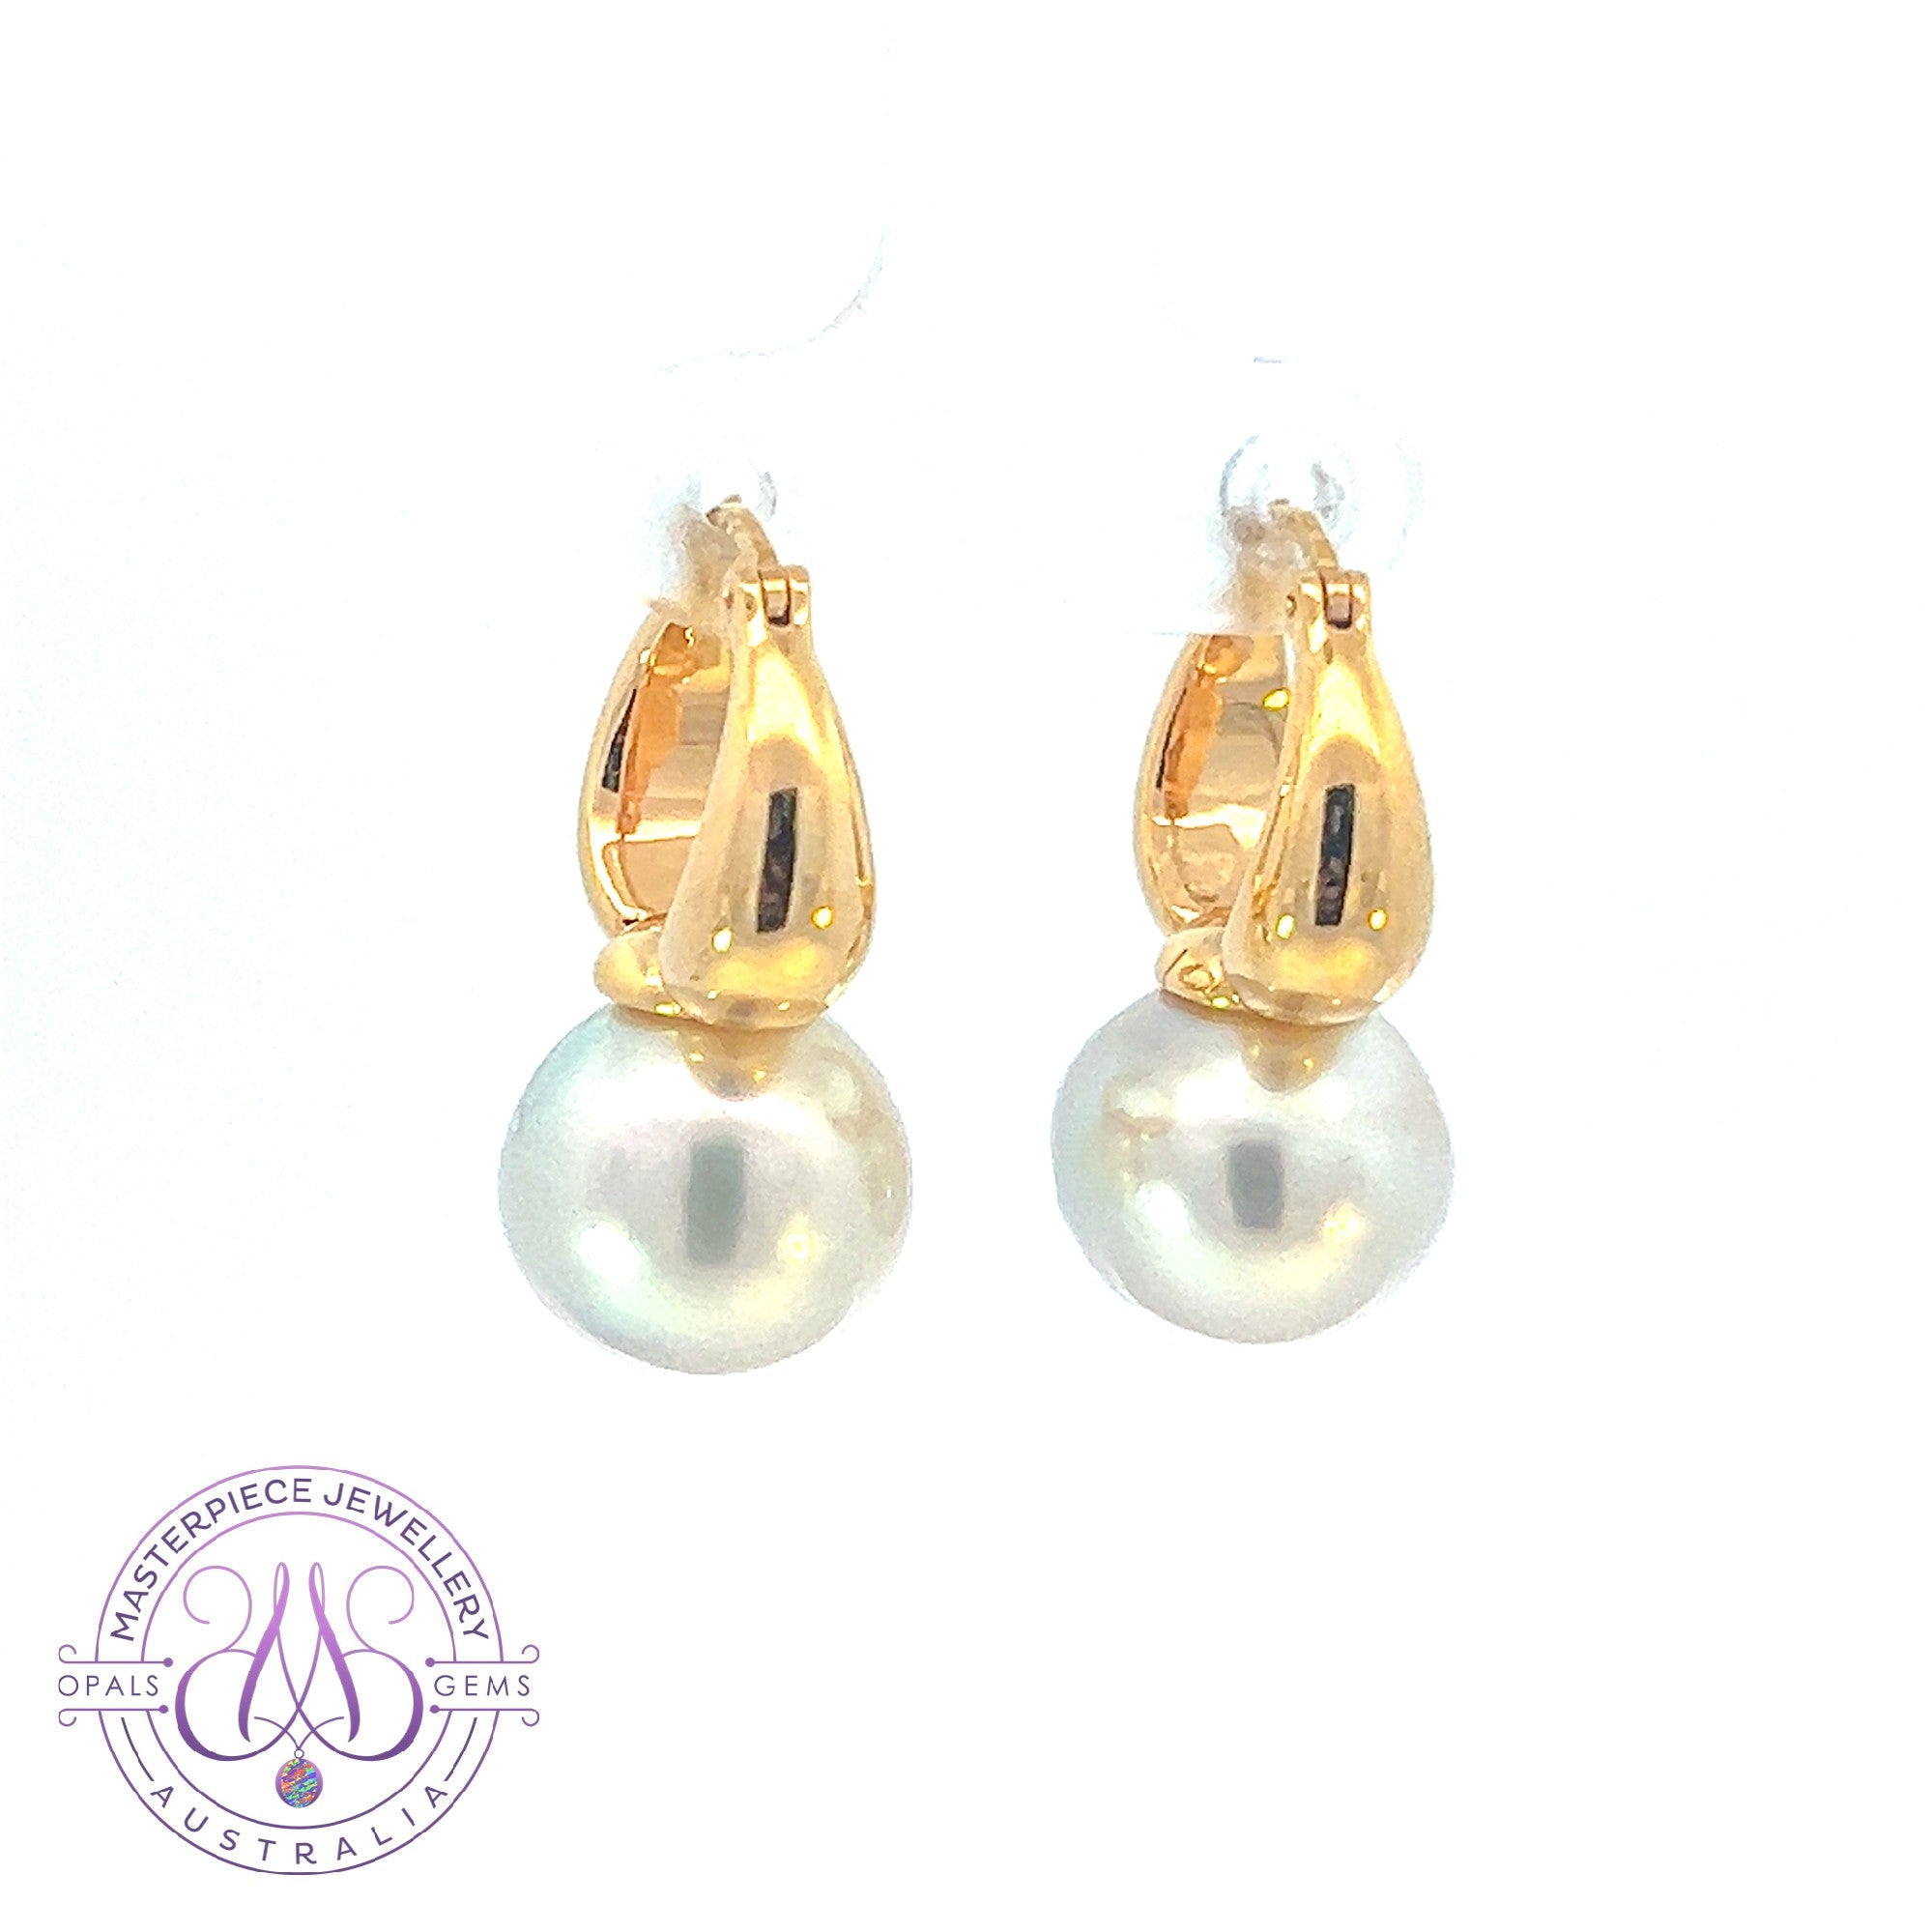 18kt Yellow Gold Huggie style 12-12.5mm South Sea Pearl earrings